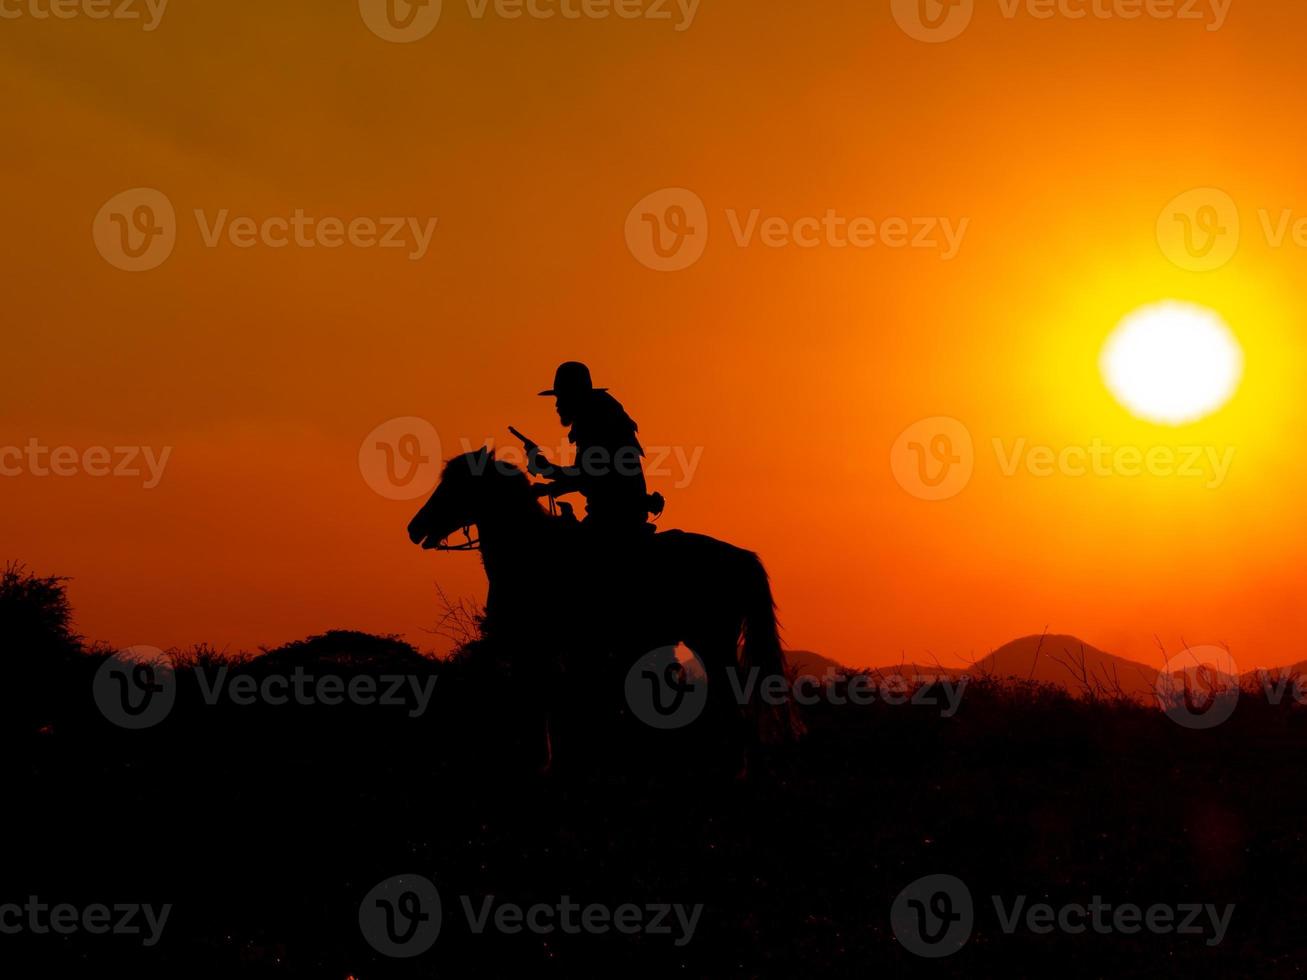 The Western Cowboy forced his horses to stop while the sun was setting, In lands where the law has not yet reached photo